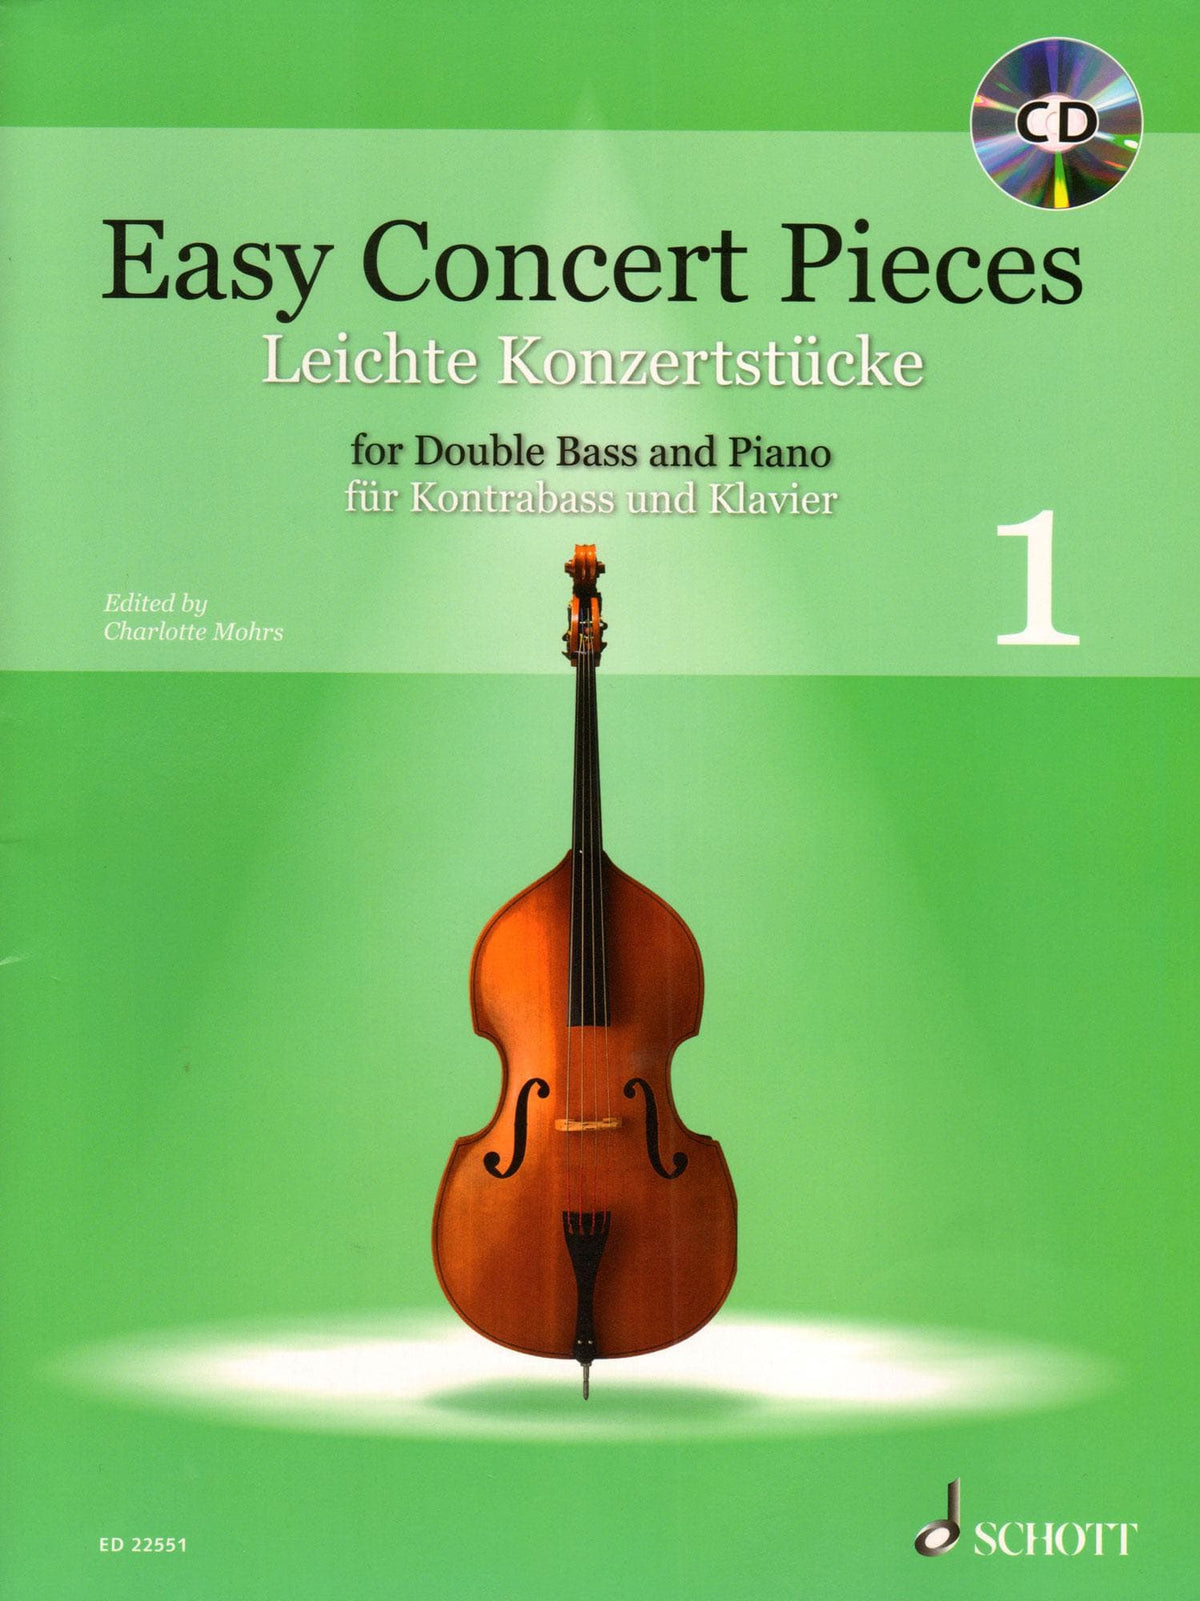 Easy Concert Pieces - for Double Bass and Piano - Schott